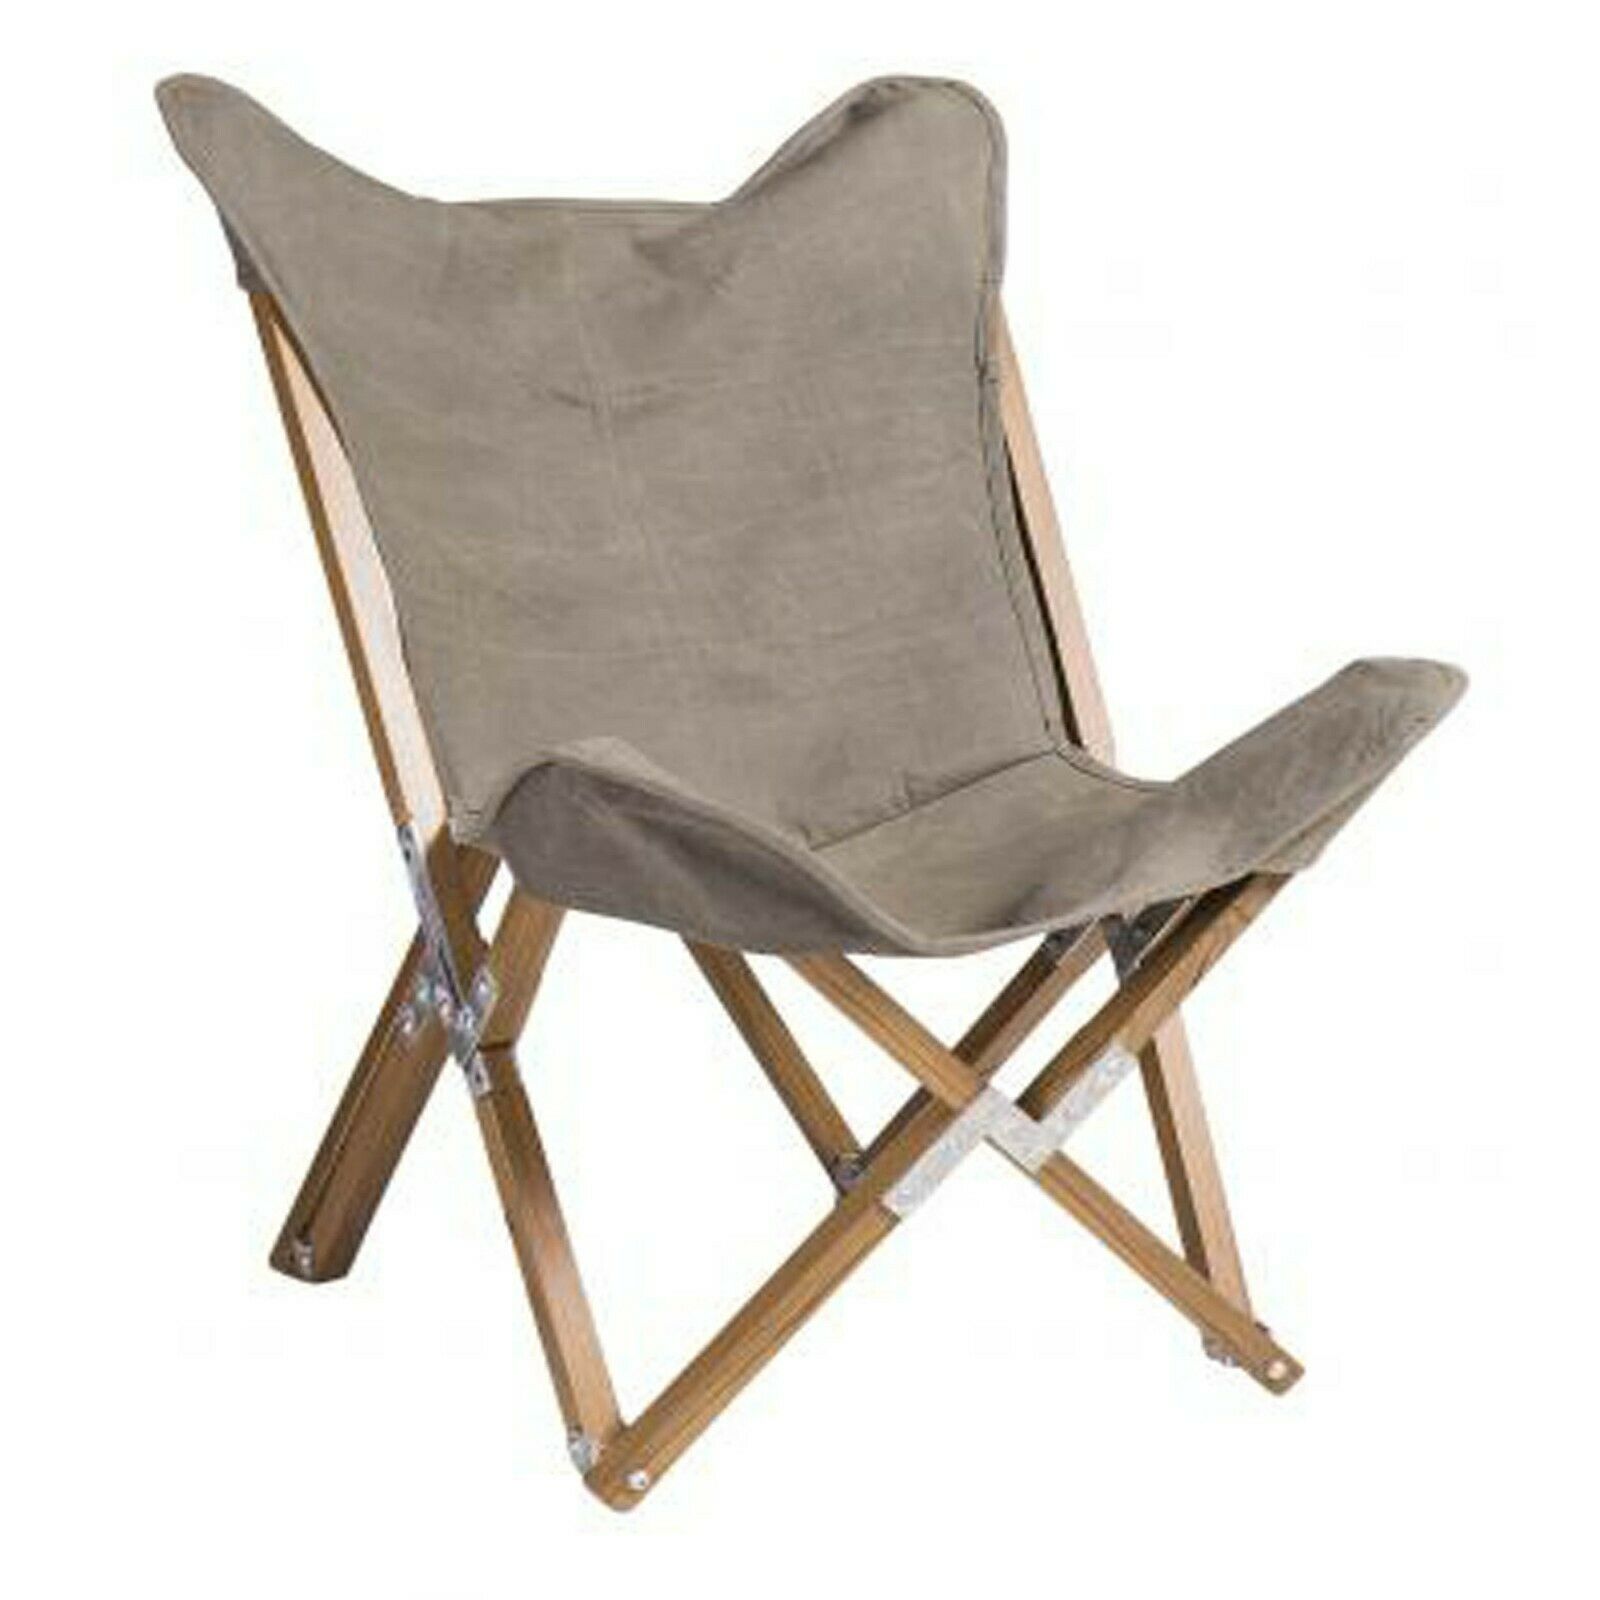 Green Canvas Vintage Style Folding Butterfly Chair Seat Retro Interior